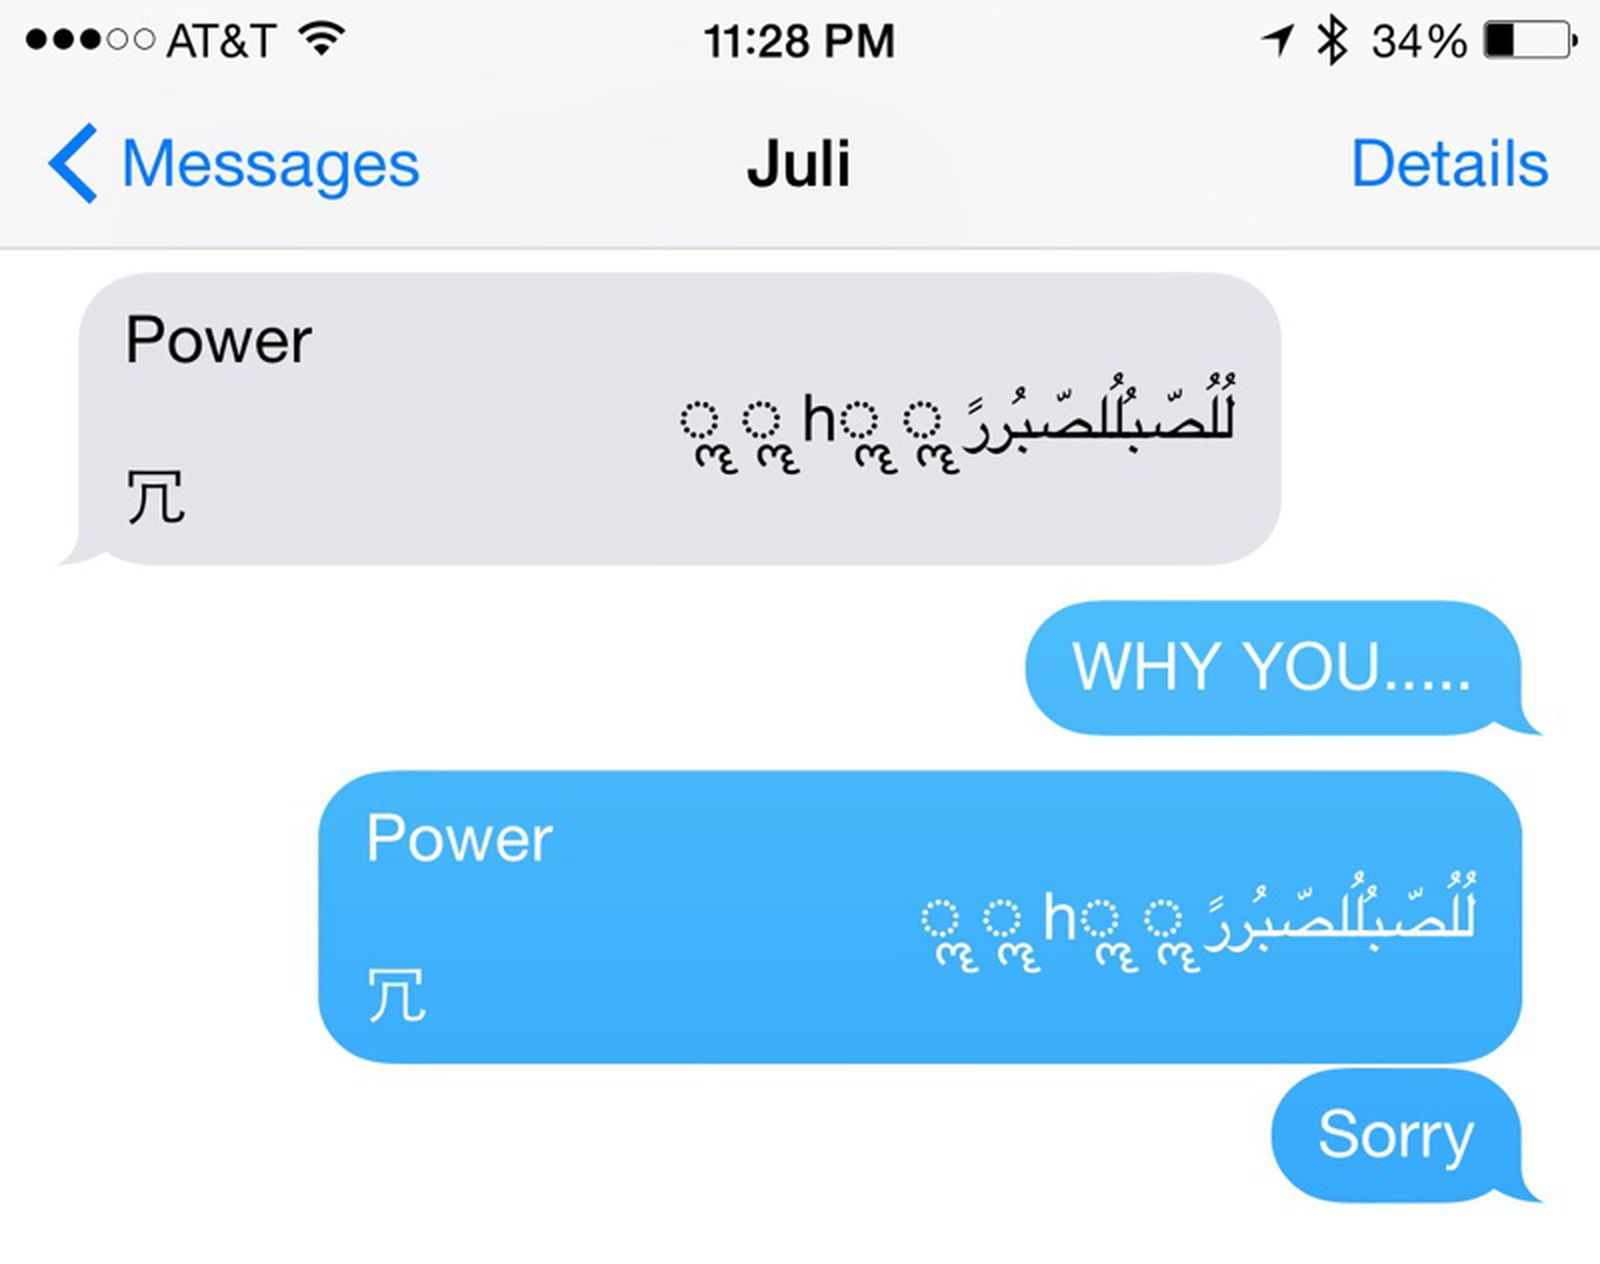 New Ios Bug Crashing Iphones Simply By Receiving A Text Message Includes Fix Macrumors